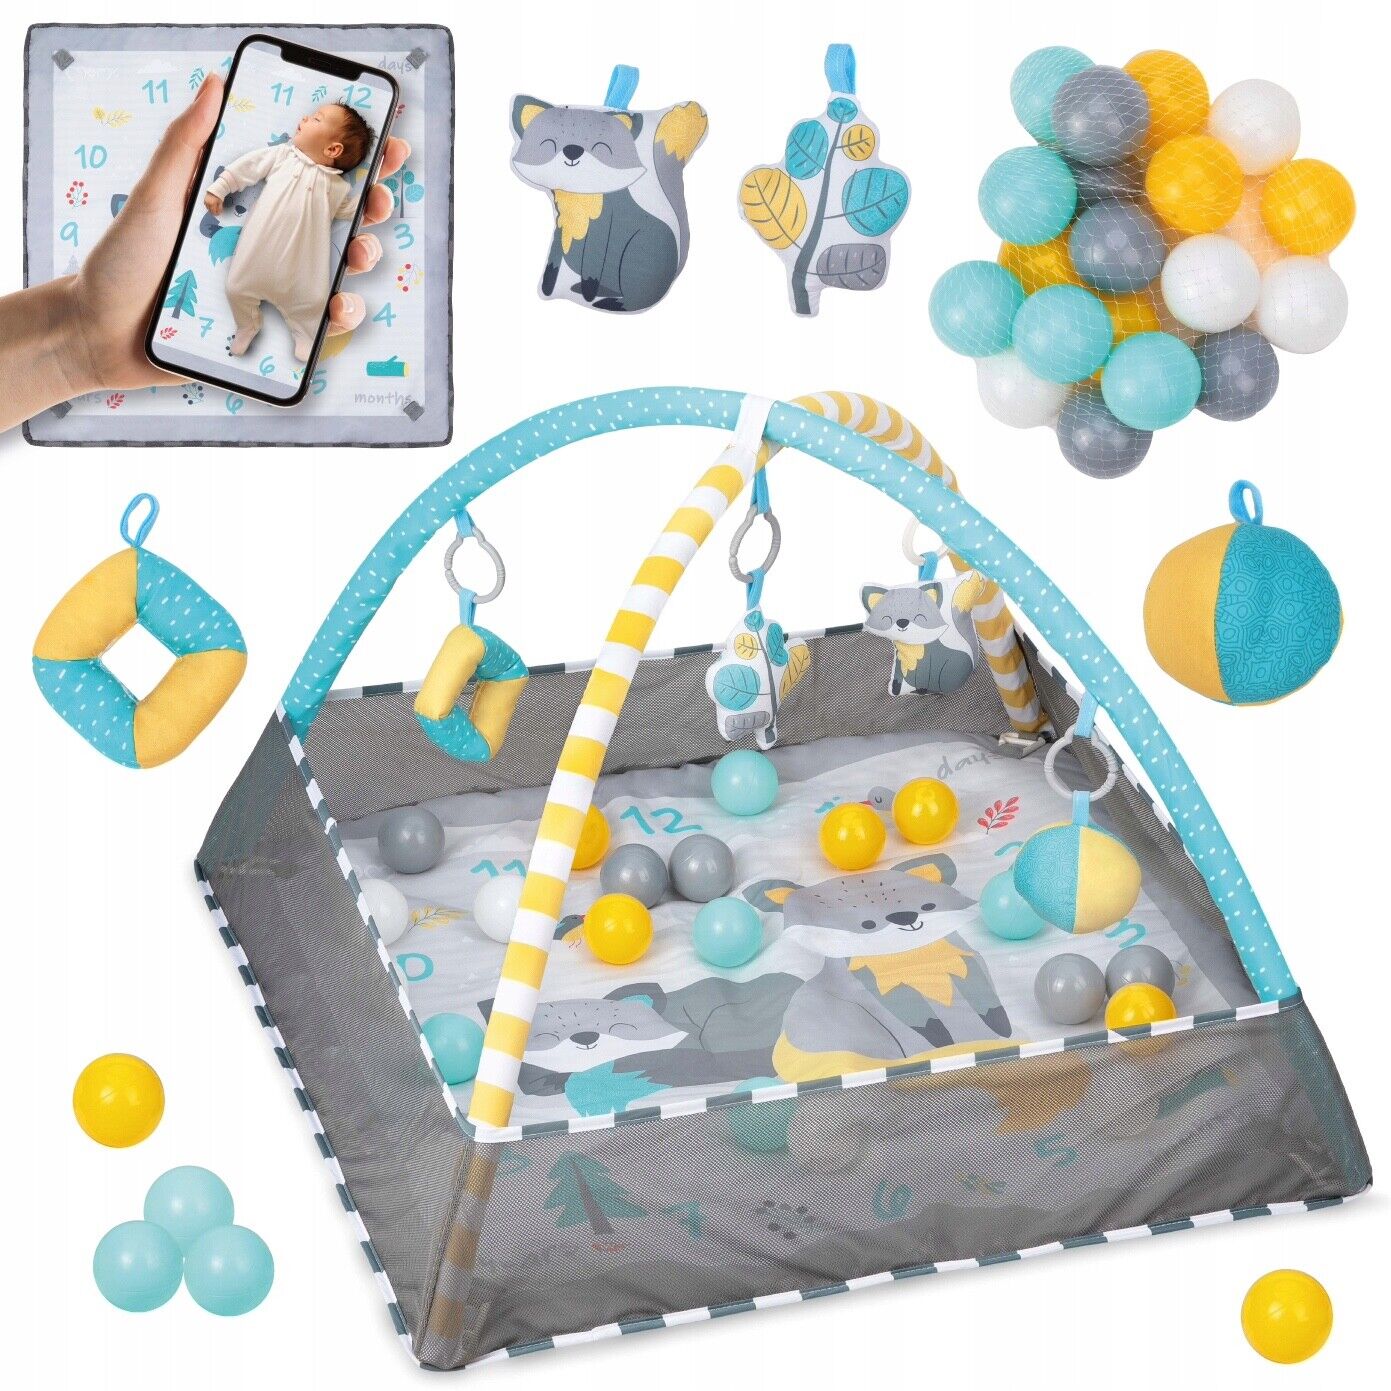 Baby Smartplay Activity 4in1 educational Playmat with Toys playpen MOMI LAMMIS